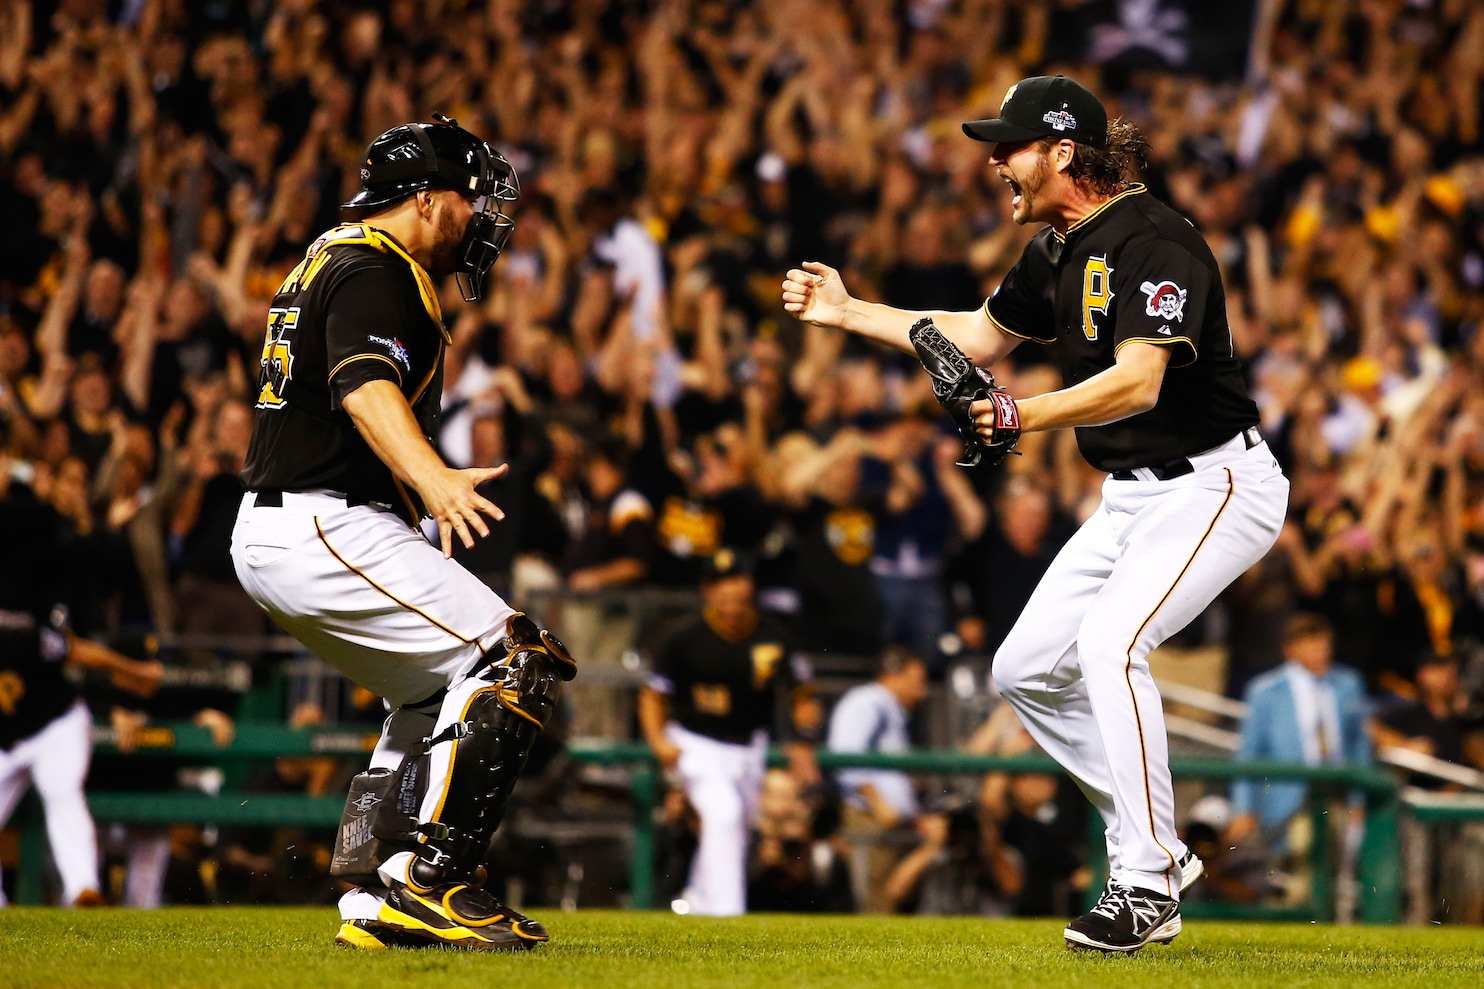 Pittsburgh Pirates: Comparing the Rookie Seasons of Bryan Reynolds